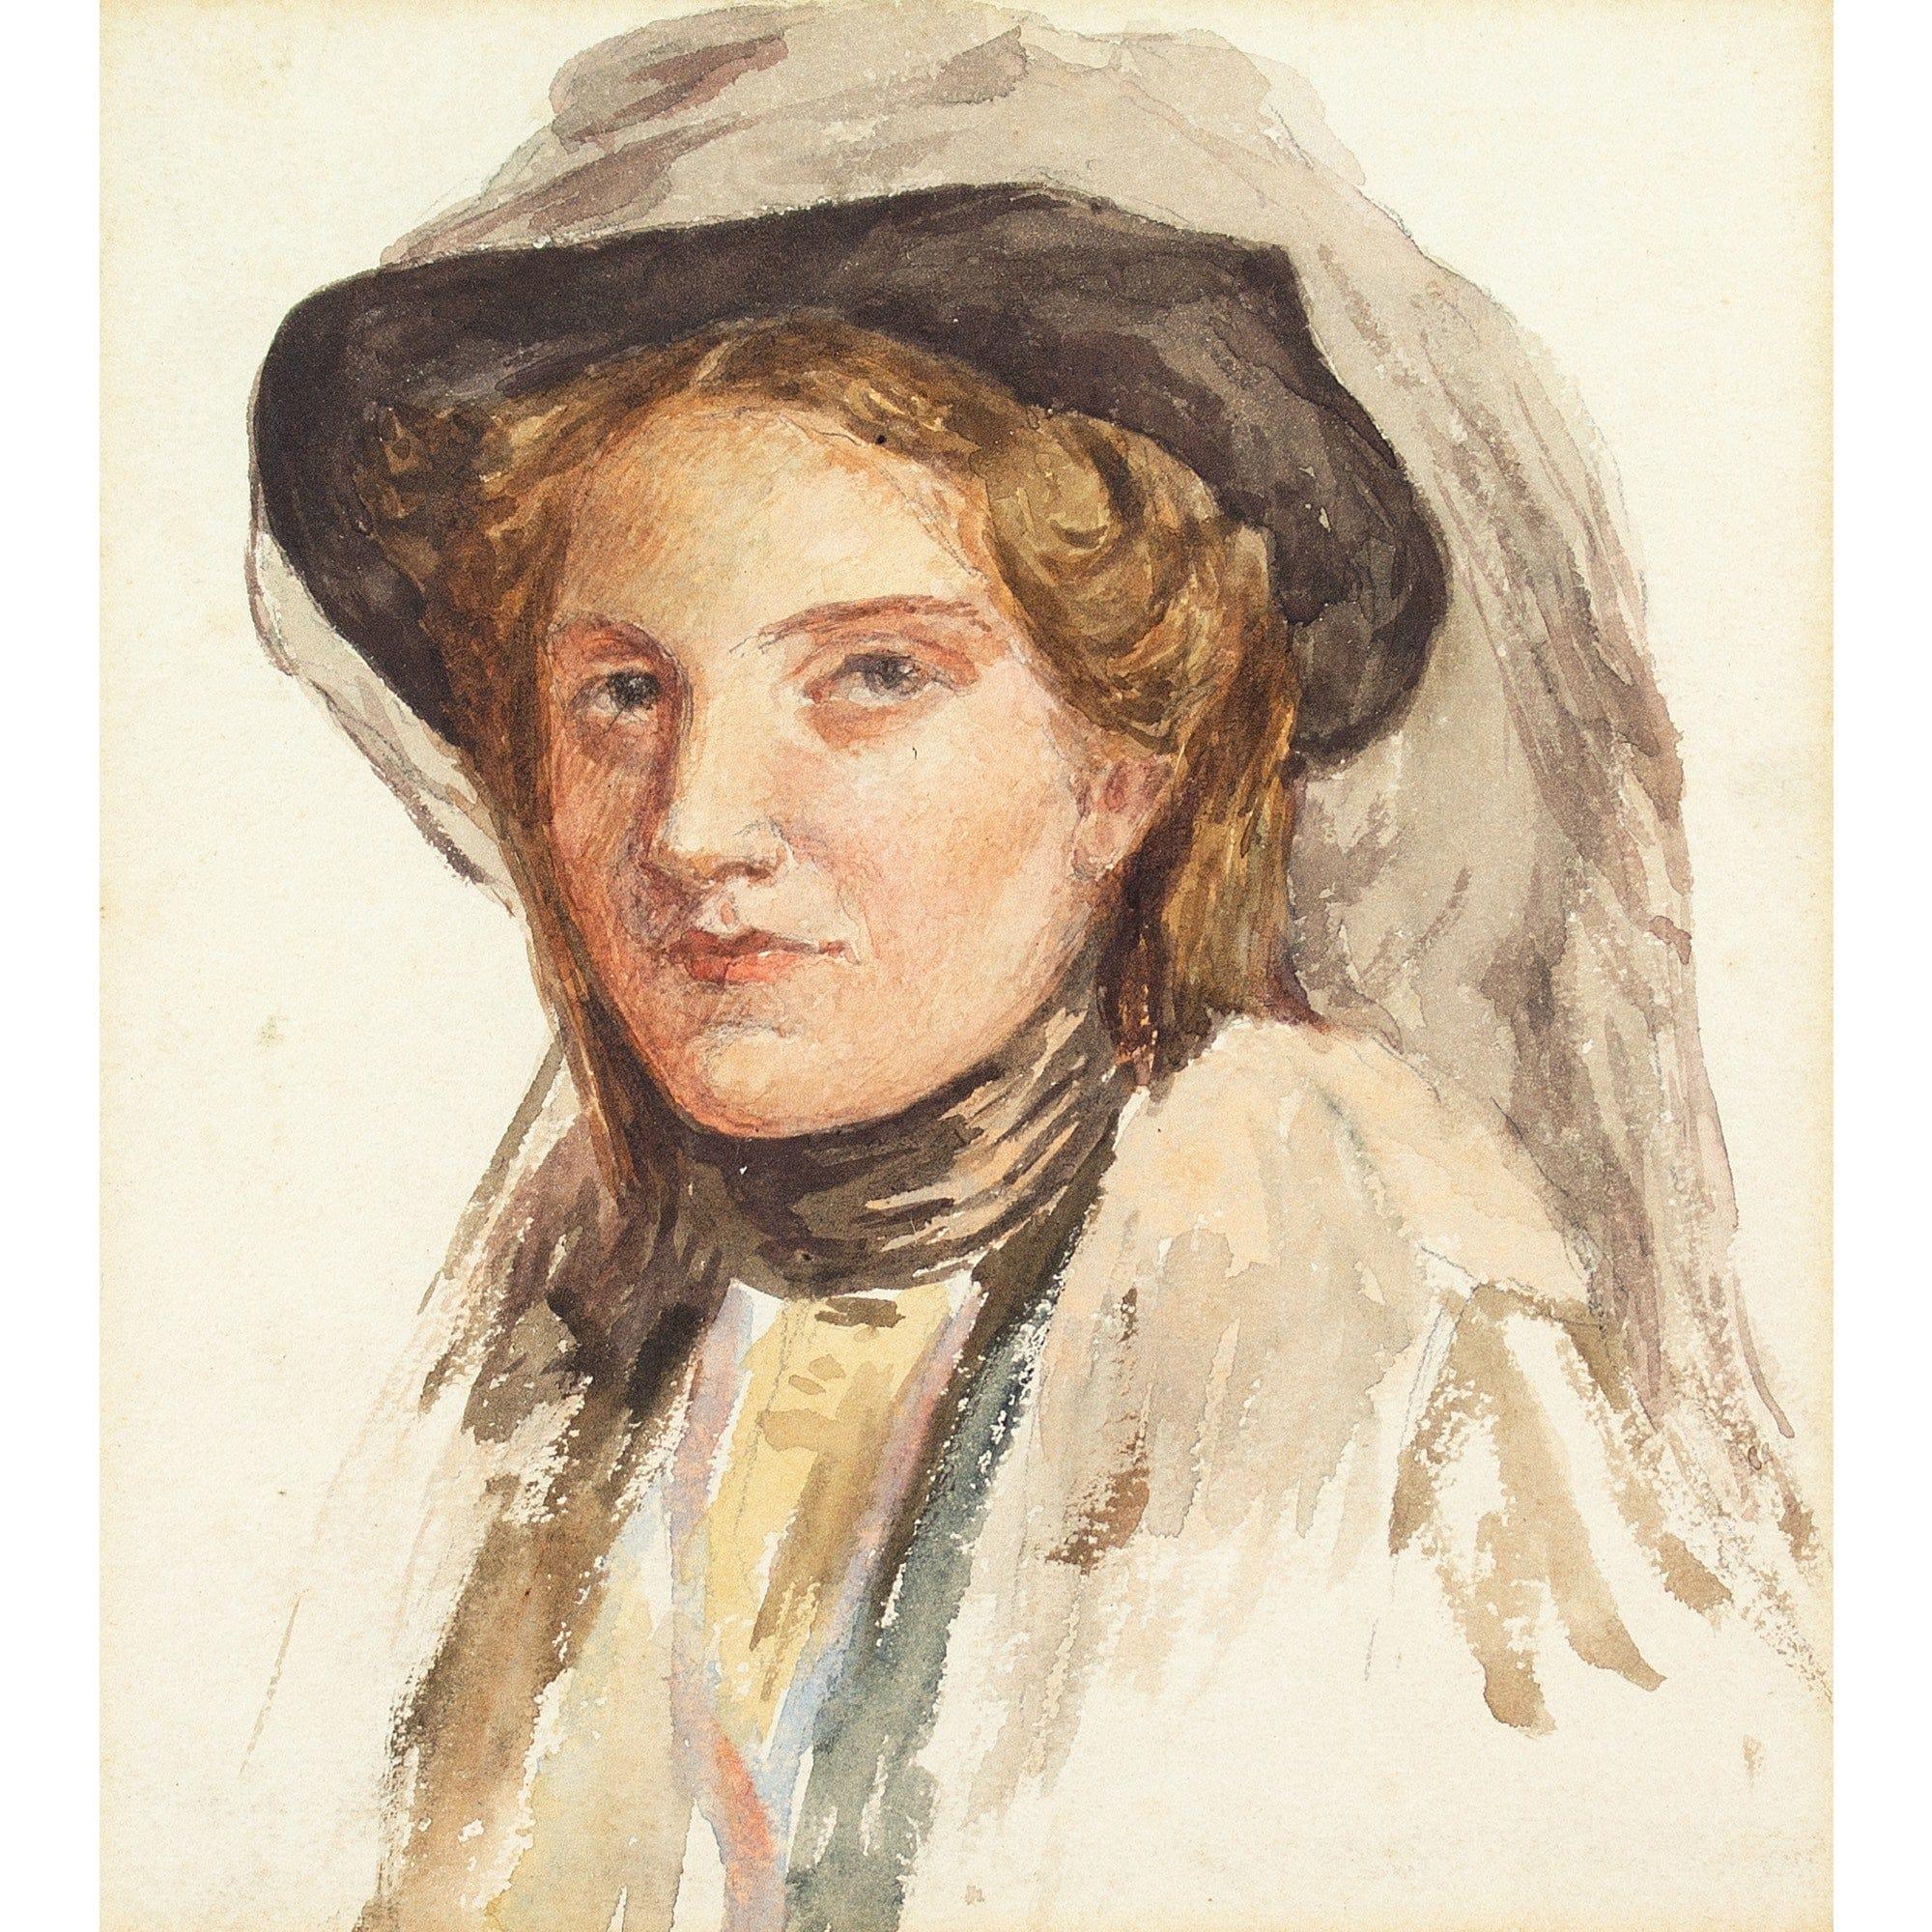 Late 19th-Century British School, Portrait Study Of A Woman, Watercolour - English School Art by Unknown